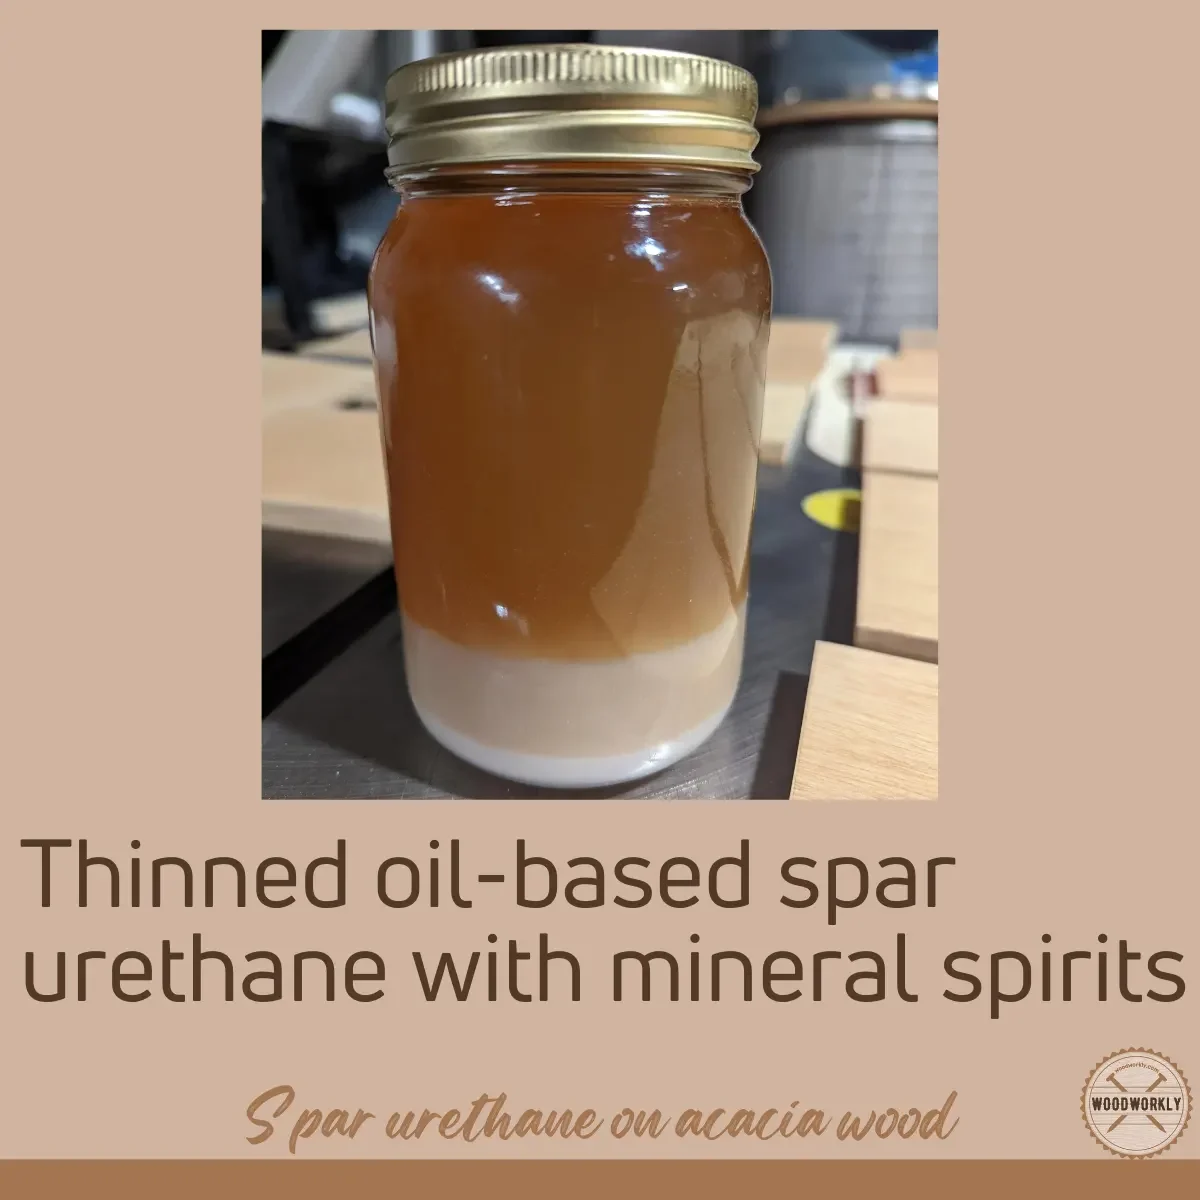 Thinned oil-based spar urethane with mineral spirits